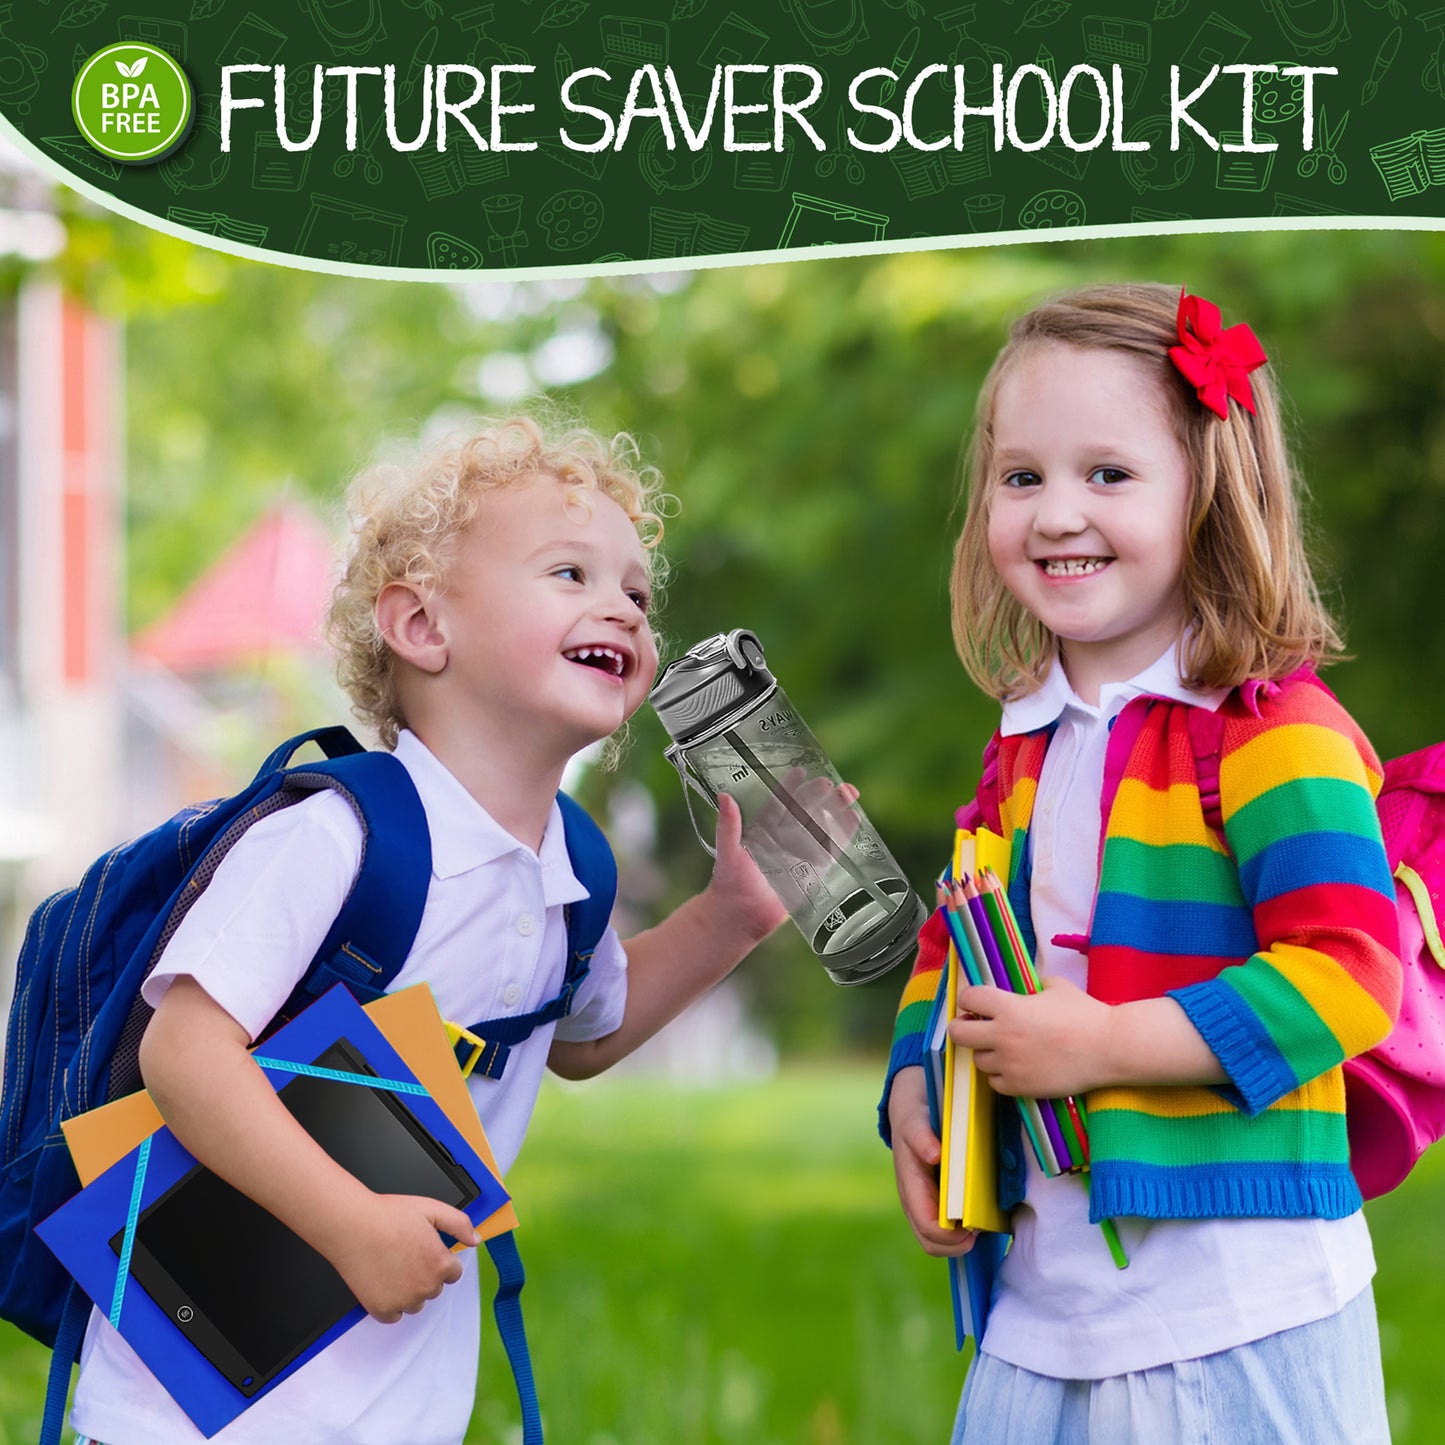 Eco-Friendly School Kit for Elementary, Middle School with LCD Tablet